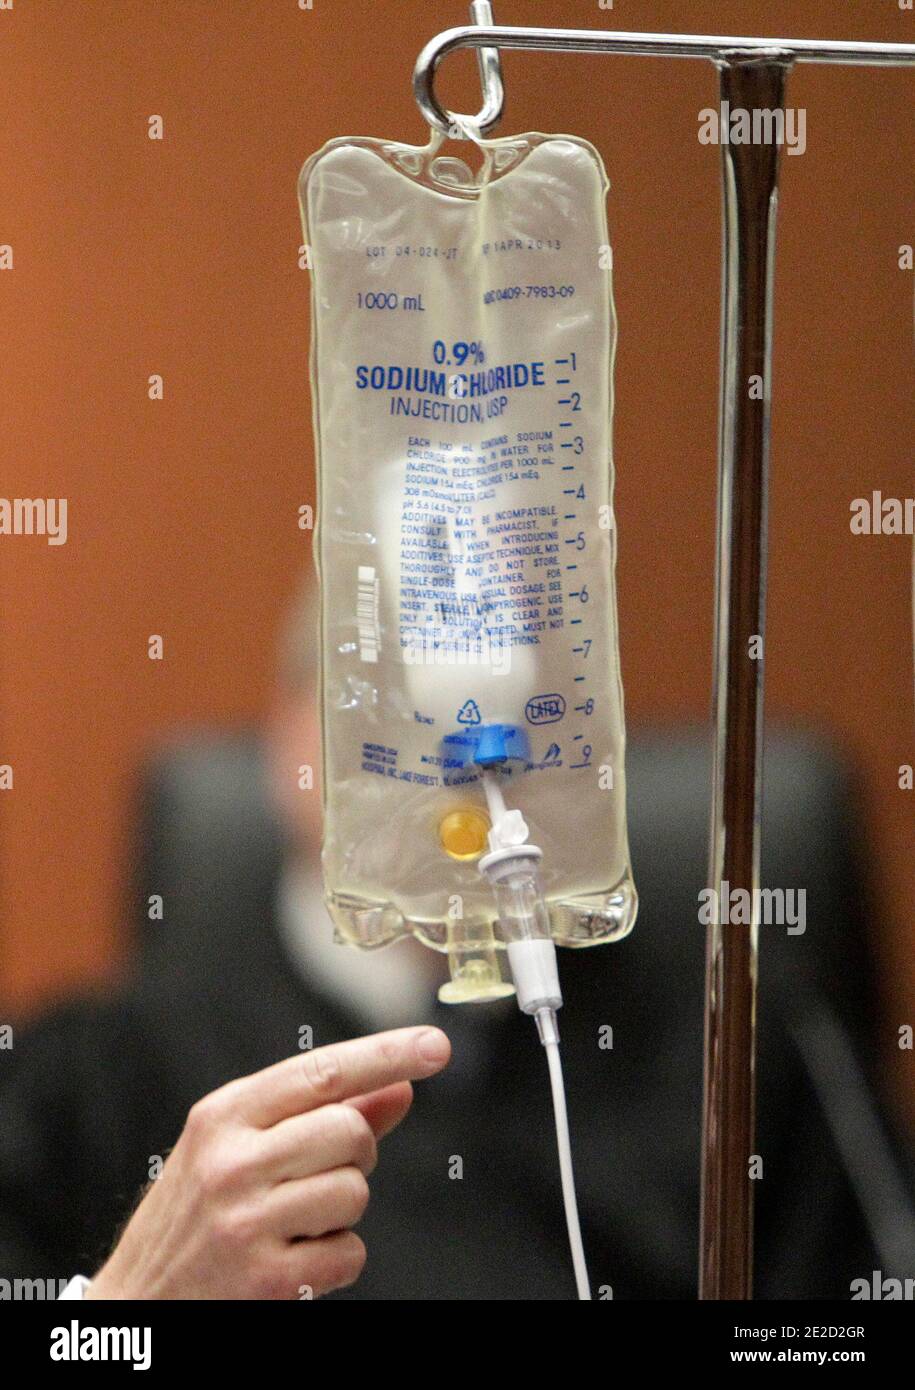 Anesthesiology expert Dr. Steven Shafer points to a bottle of propofol placed in an empty saline bag during Dr. Conrad Murray's involuntary manslaughter trial in Los Angeles on October 20, 2011. Murray has pleaded not guilty and faces four years in prison and the loss of his medical license if convicted of involuntary manslaughter in Michael Jackson's death. Photo by Reed Saxon/Pool/ABACAPRESS.COM Stock Photo